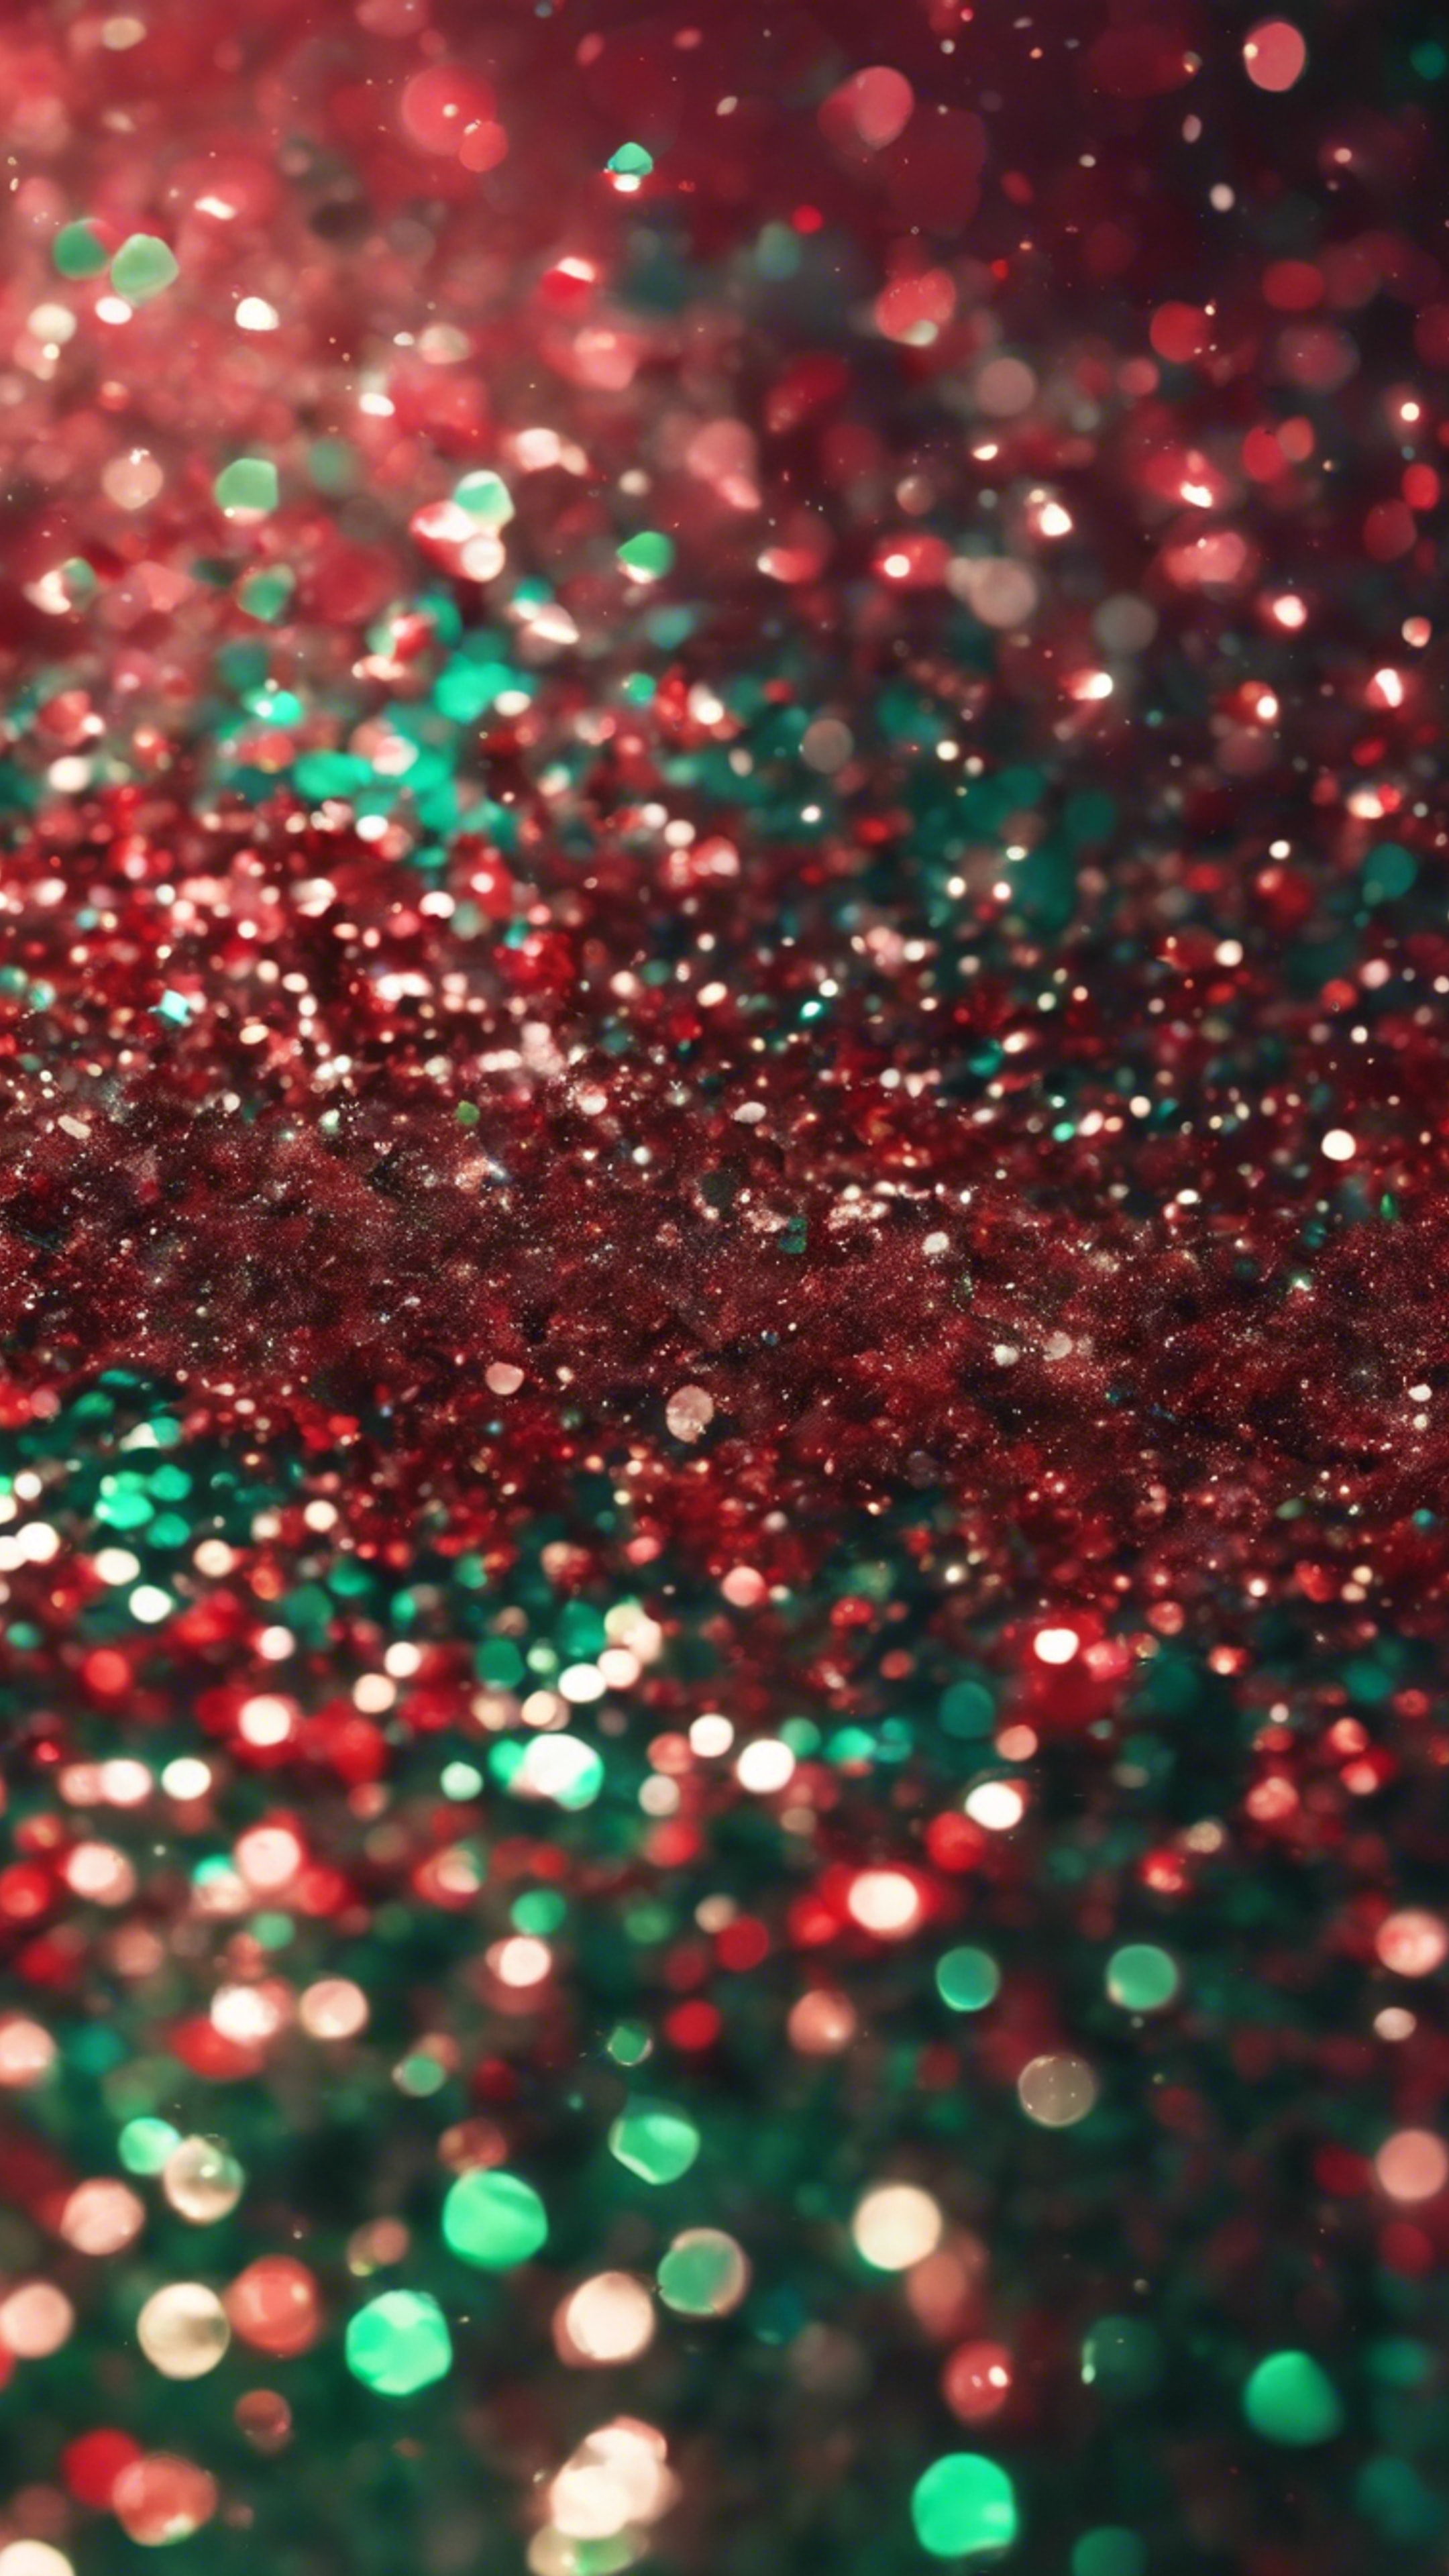 A mix of large and small particles of red and green glitter ផ្ទាំង​រូបភាព[305fad2da0d041f9bf26]